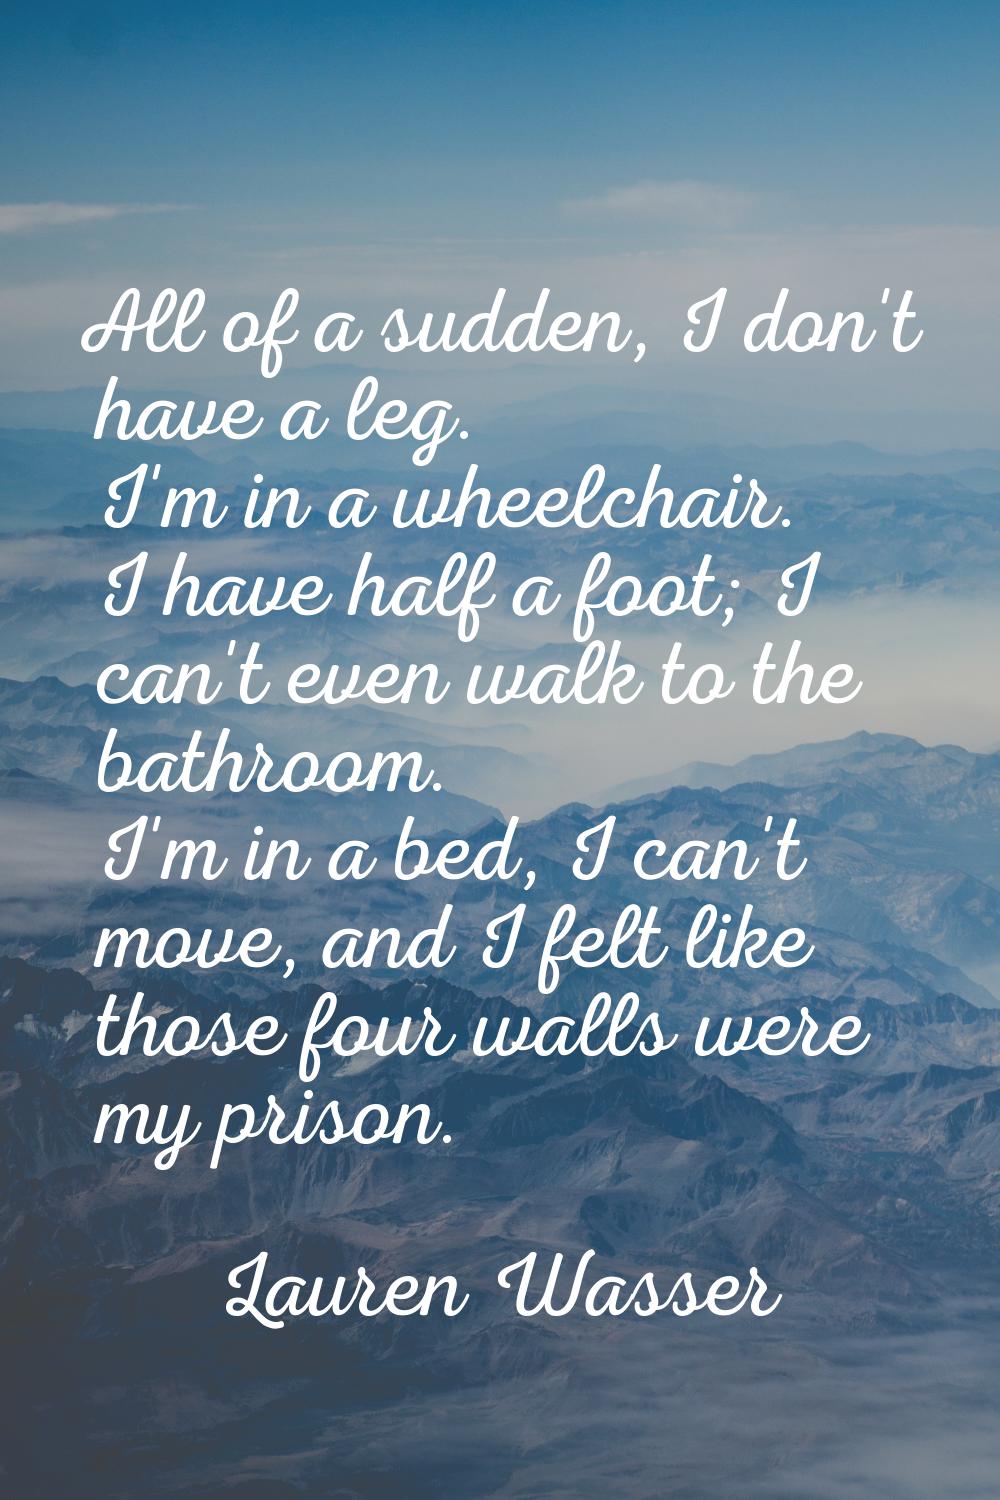 All of a sudden, I don't have a leg. I'm in a wheelchair. I have half a foot; I can't even walk to 